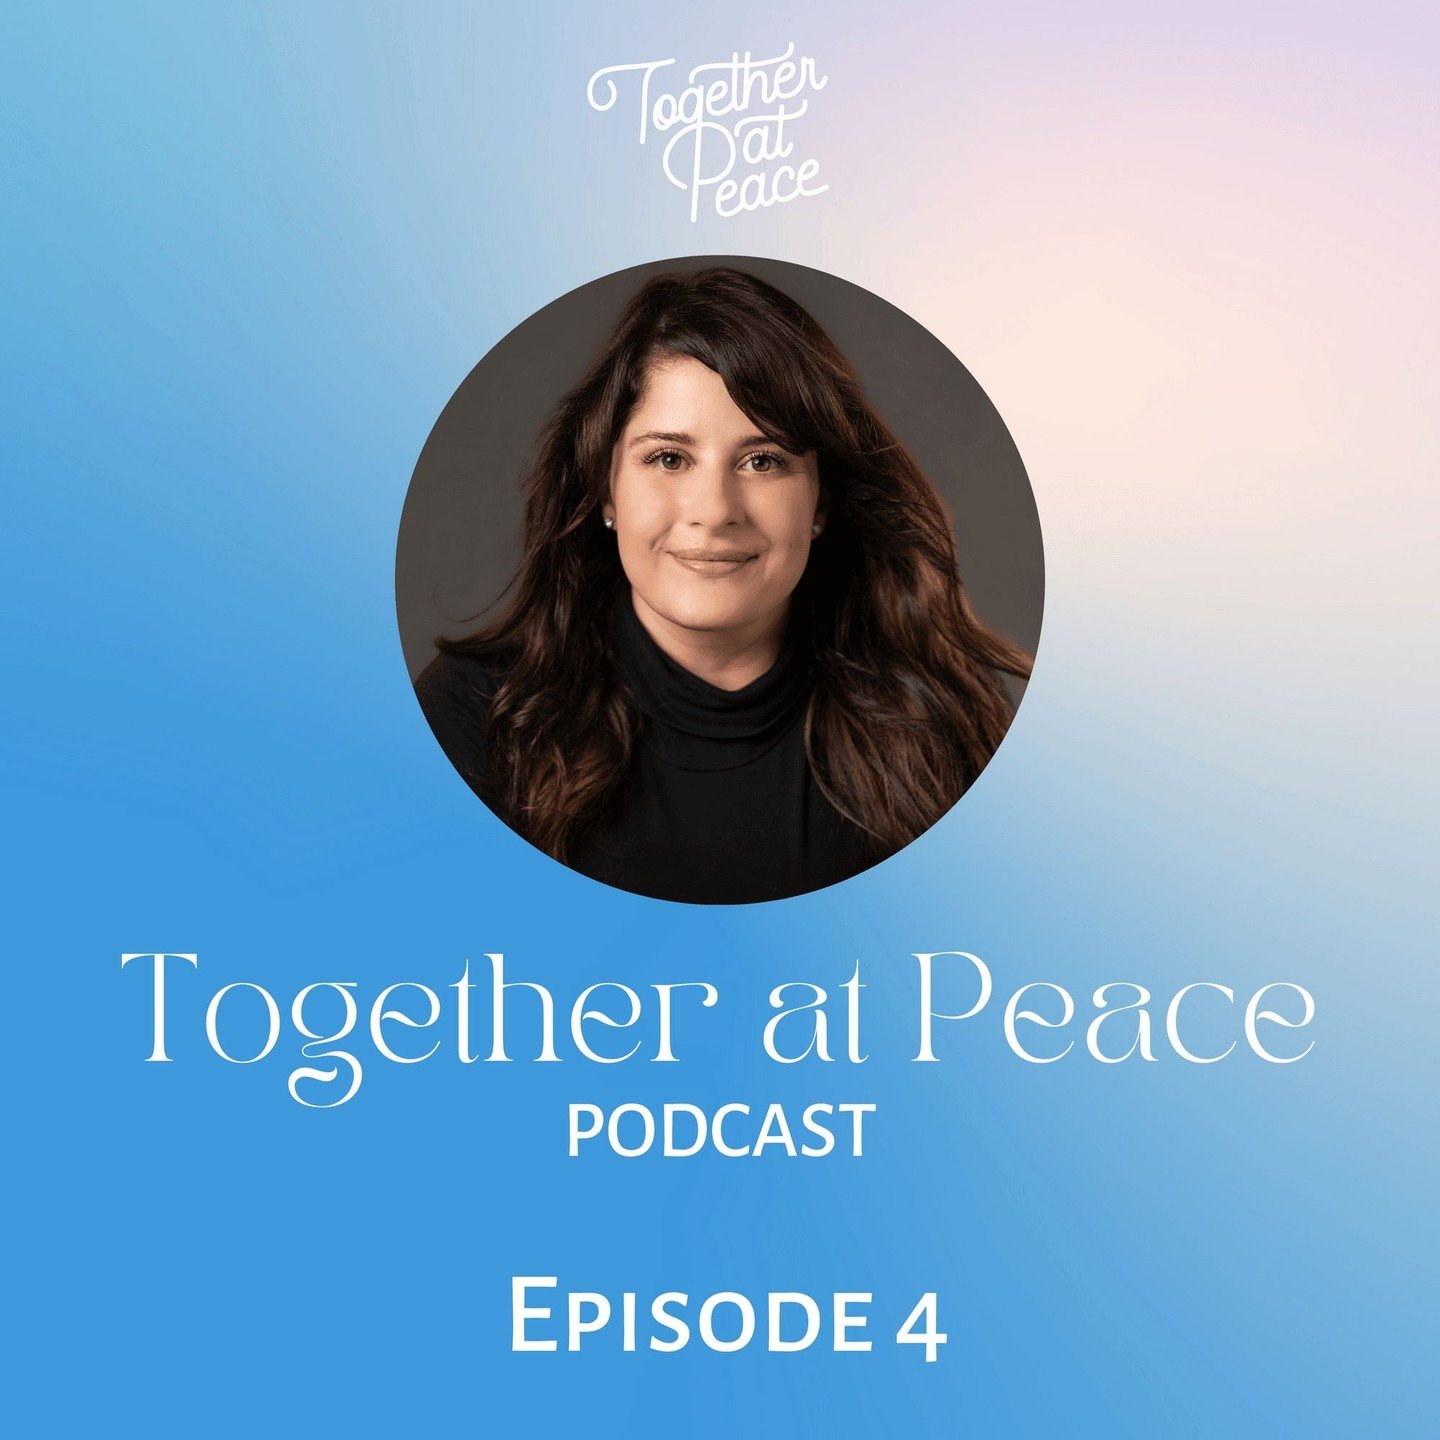 🎧💖 New Podcast Alert! Episode 4: &quot;Chief Empathy Officer&quot; Erika Sinner on the power of compassion through the loss of a pet. 💖🎧

Join us for an inspiring conversation on the latest episode of the Together at Peace Podcast, where we dive 